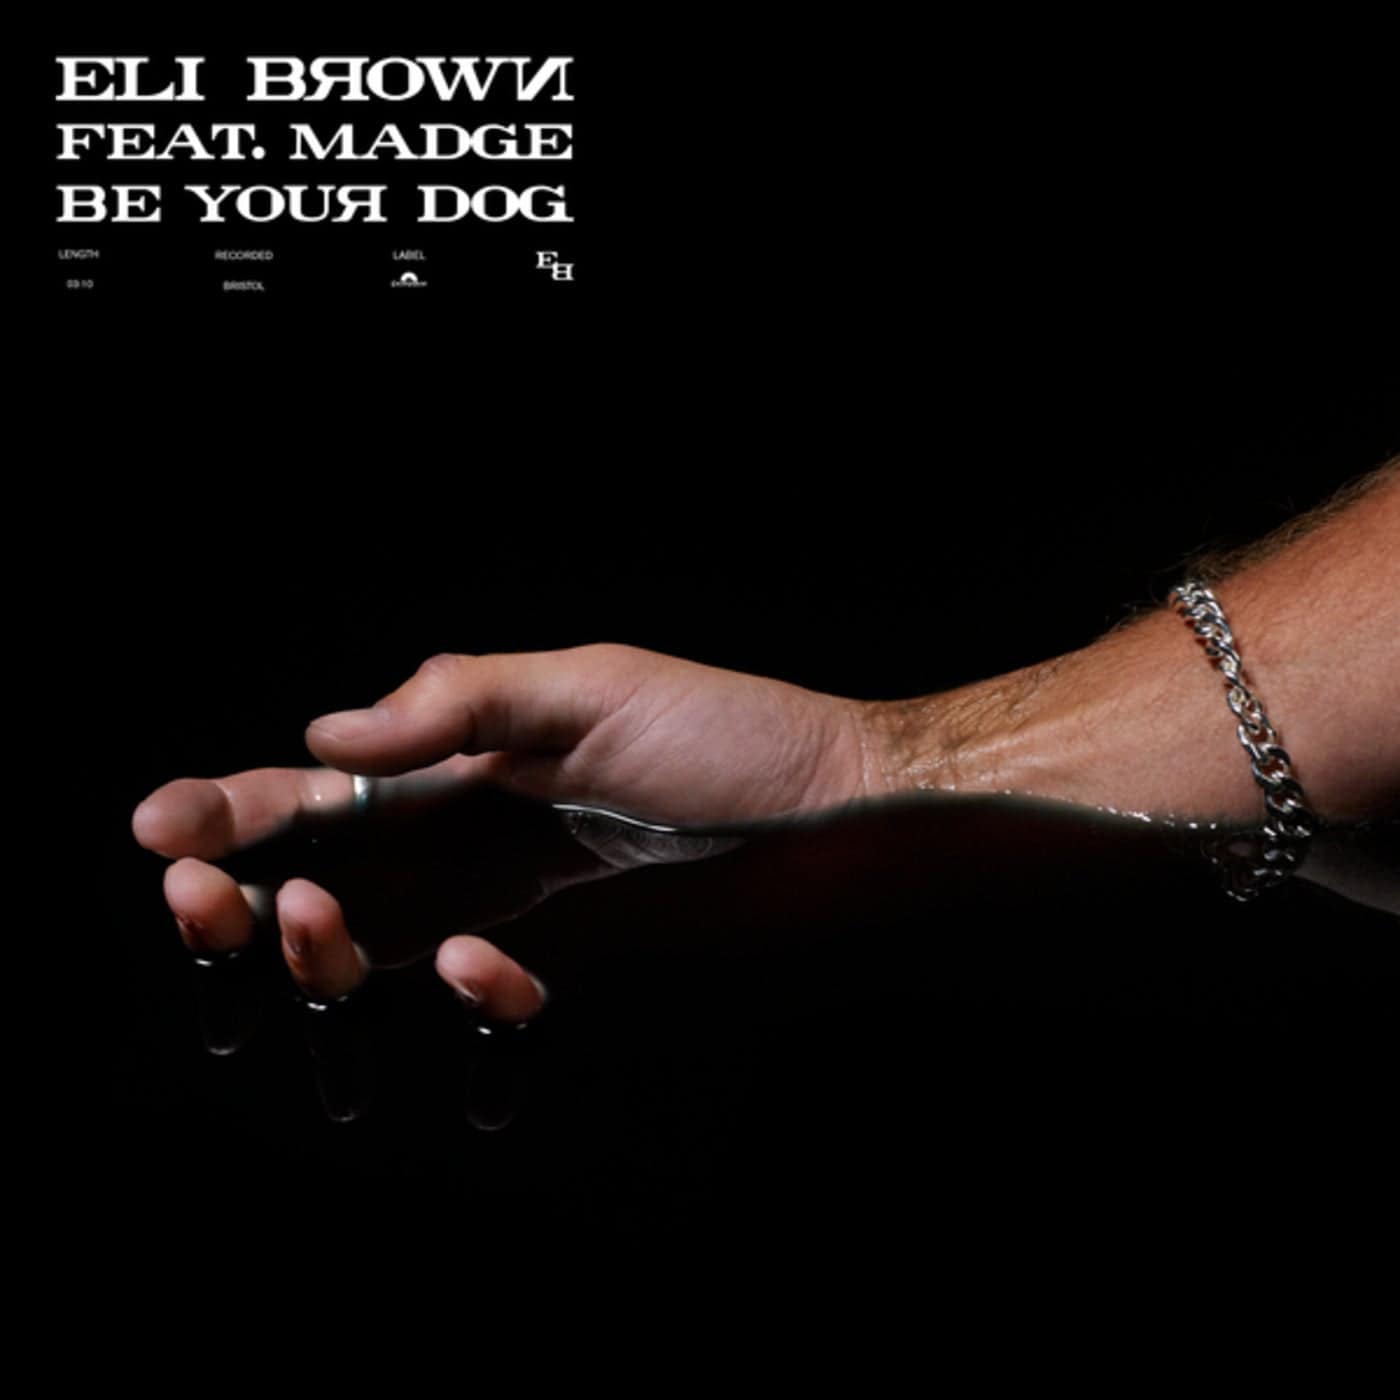 Download Be Your Dog on Electrobuzz